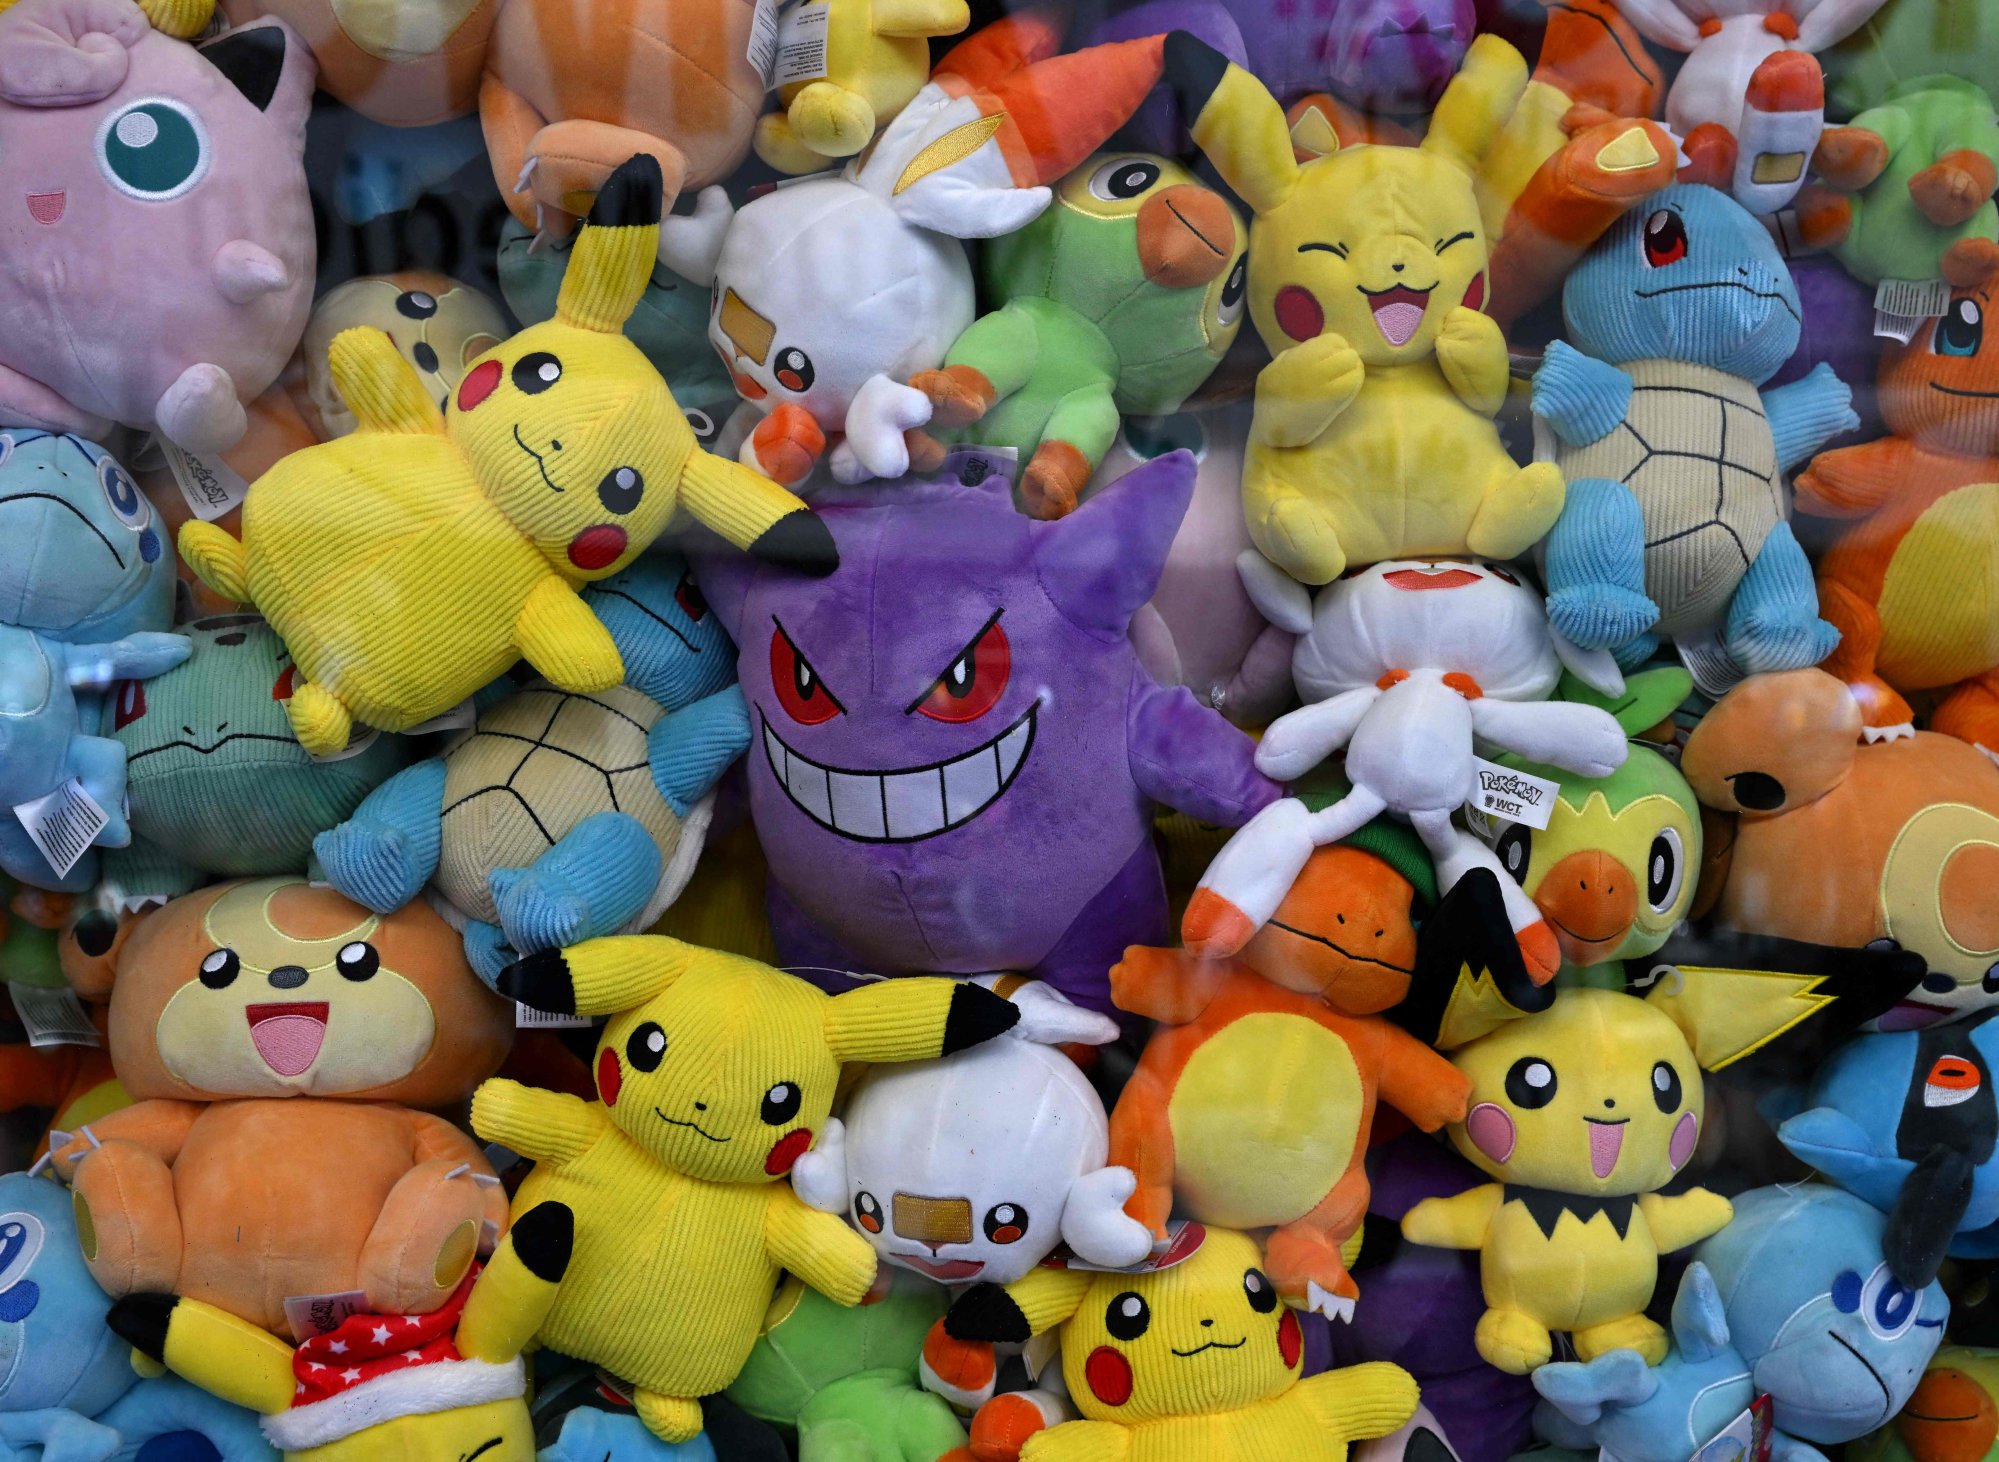 Desperate Chinese Pokémon trainers are buying Australian and US App Store  accounts on Taobao